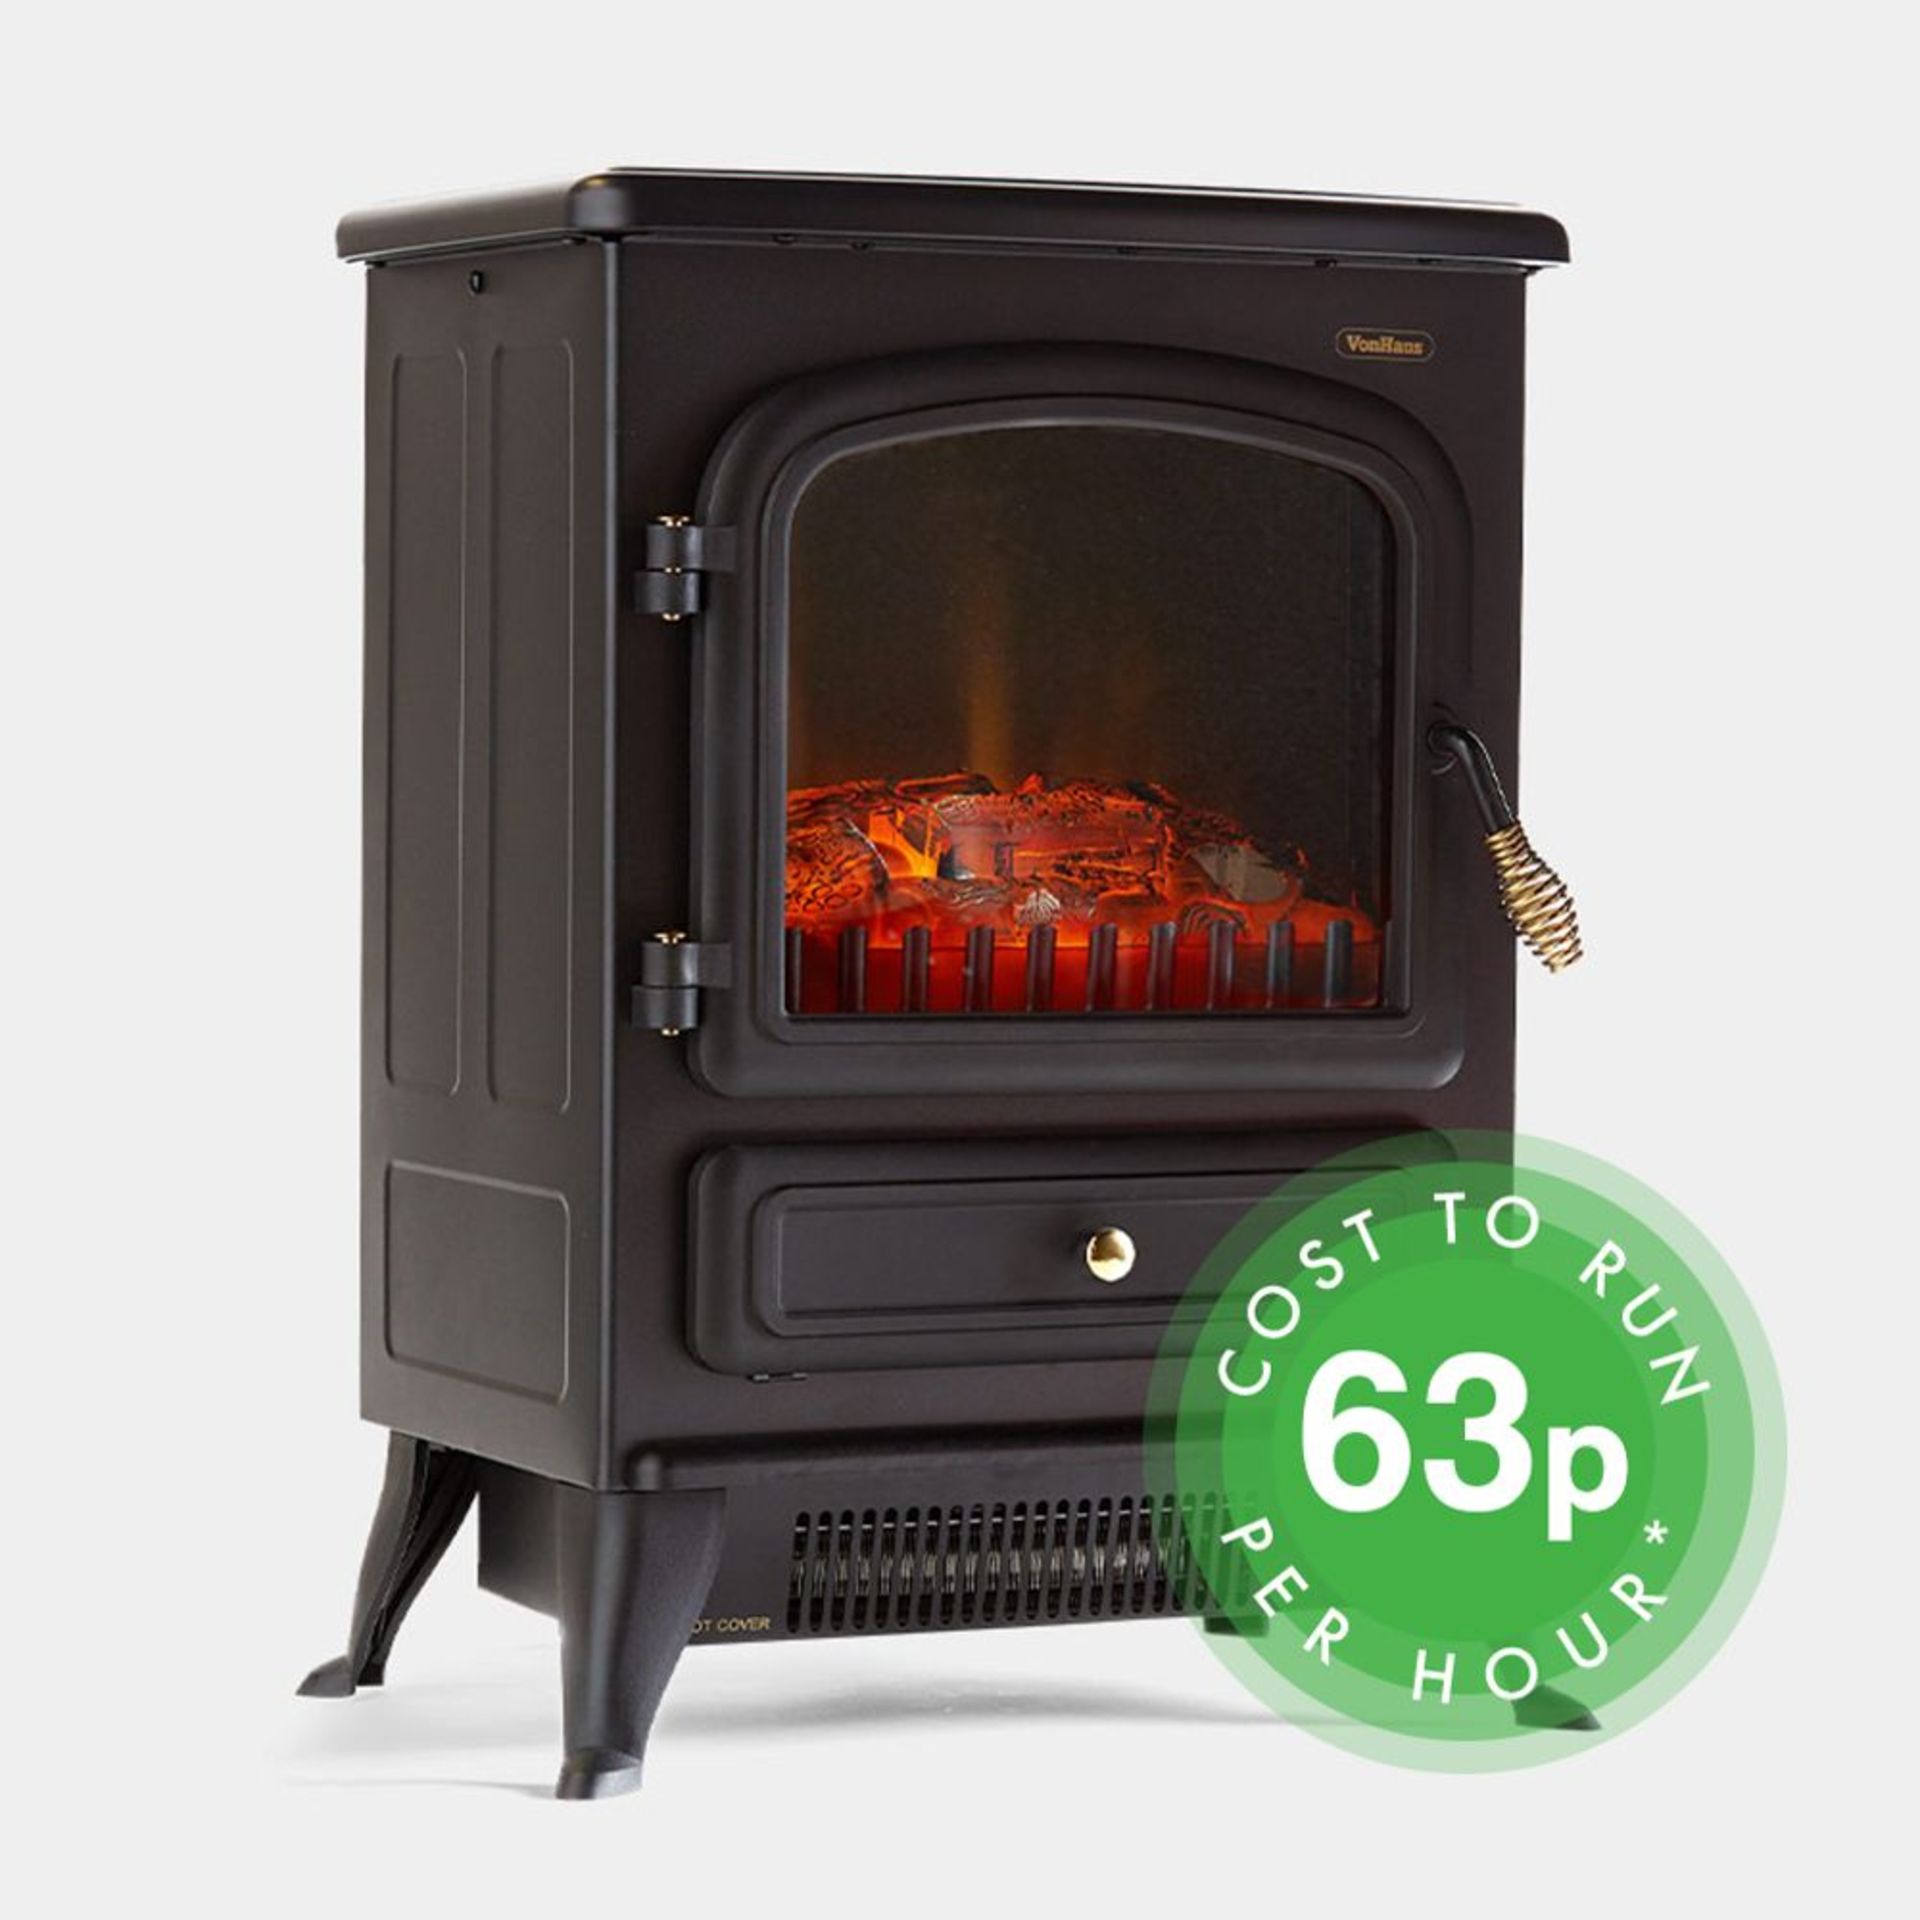 1850W Small Black Stove Heater. The electric fire heats rooms up to 53m² and benefits from two